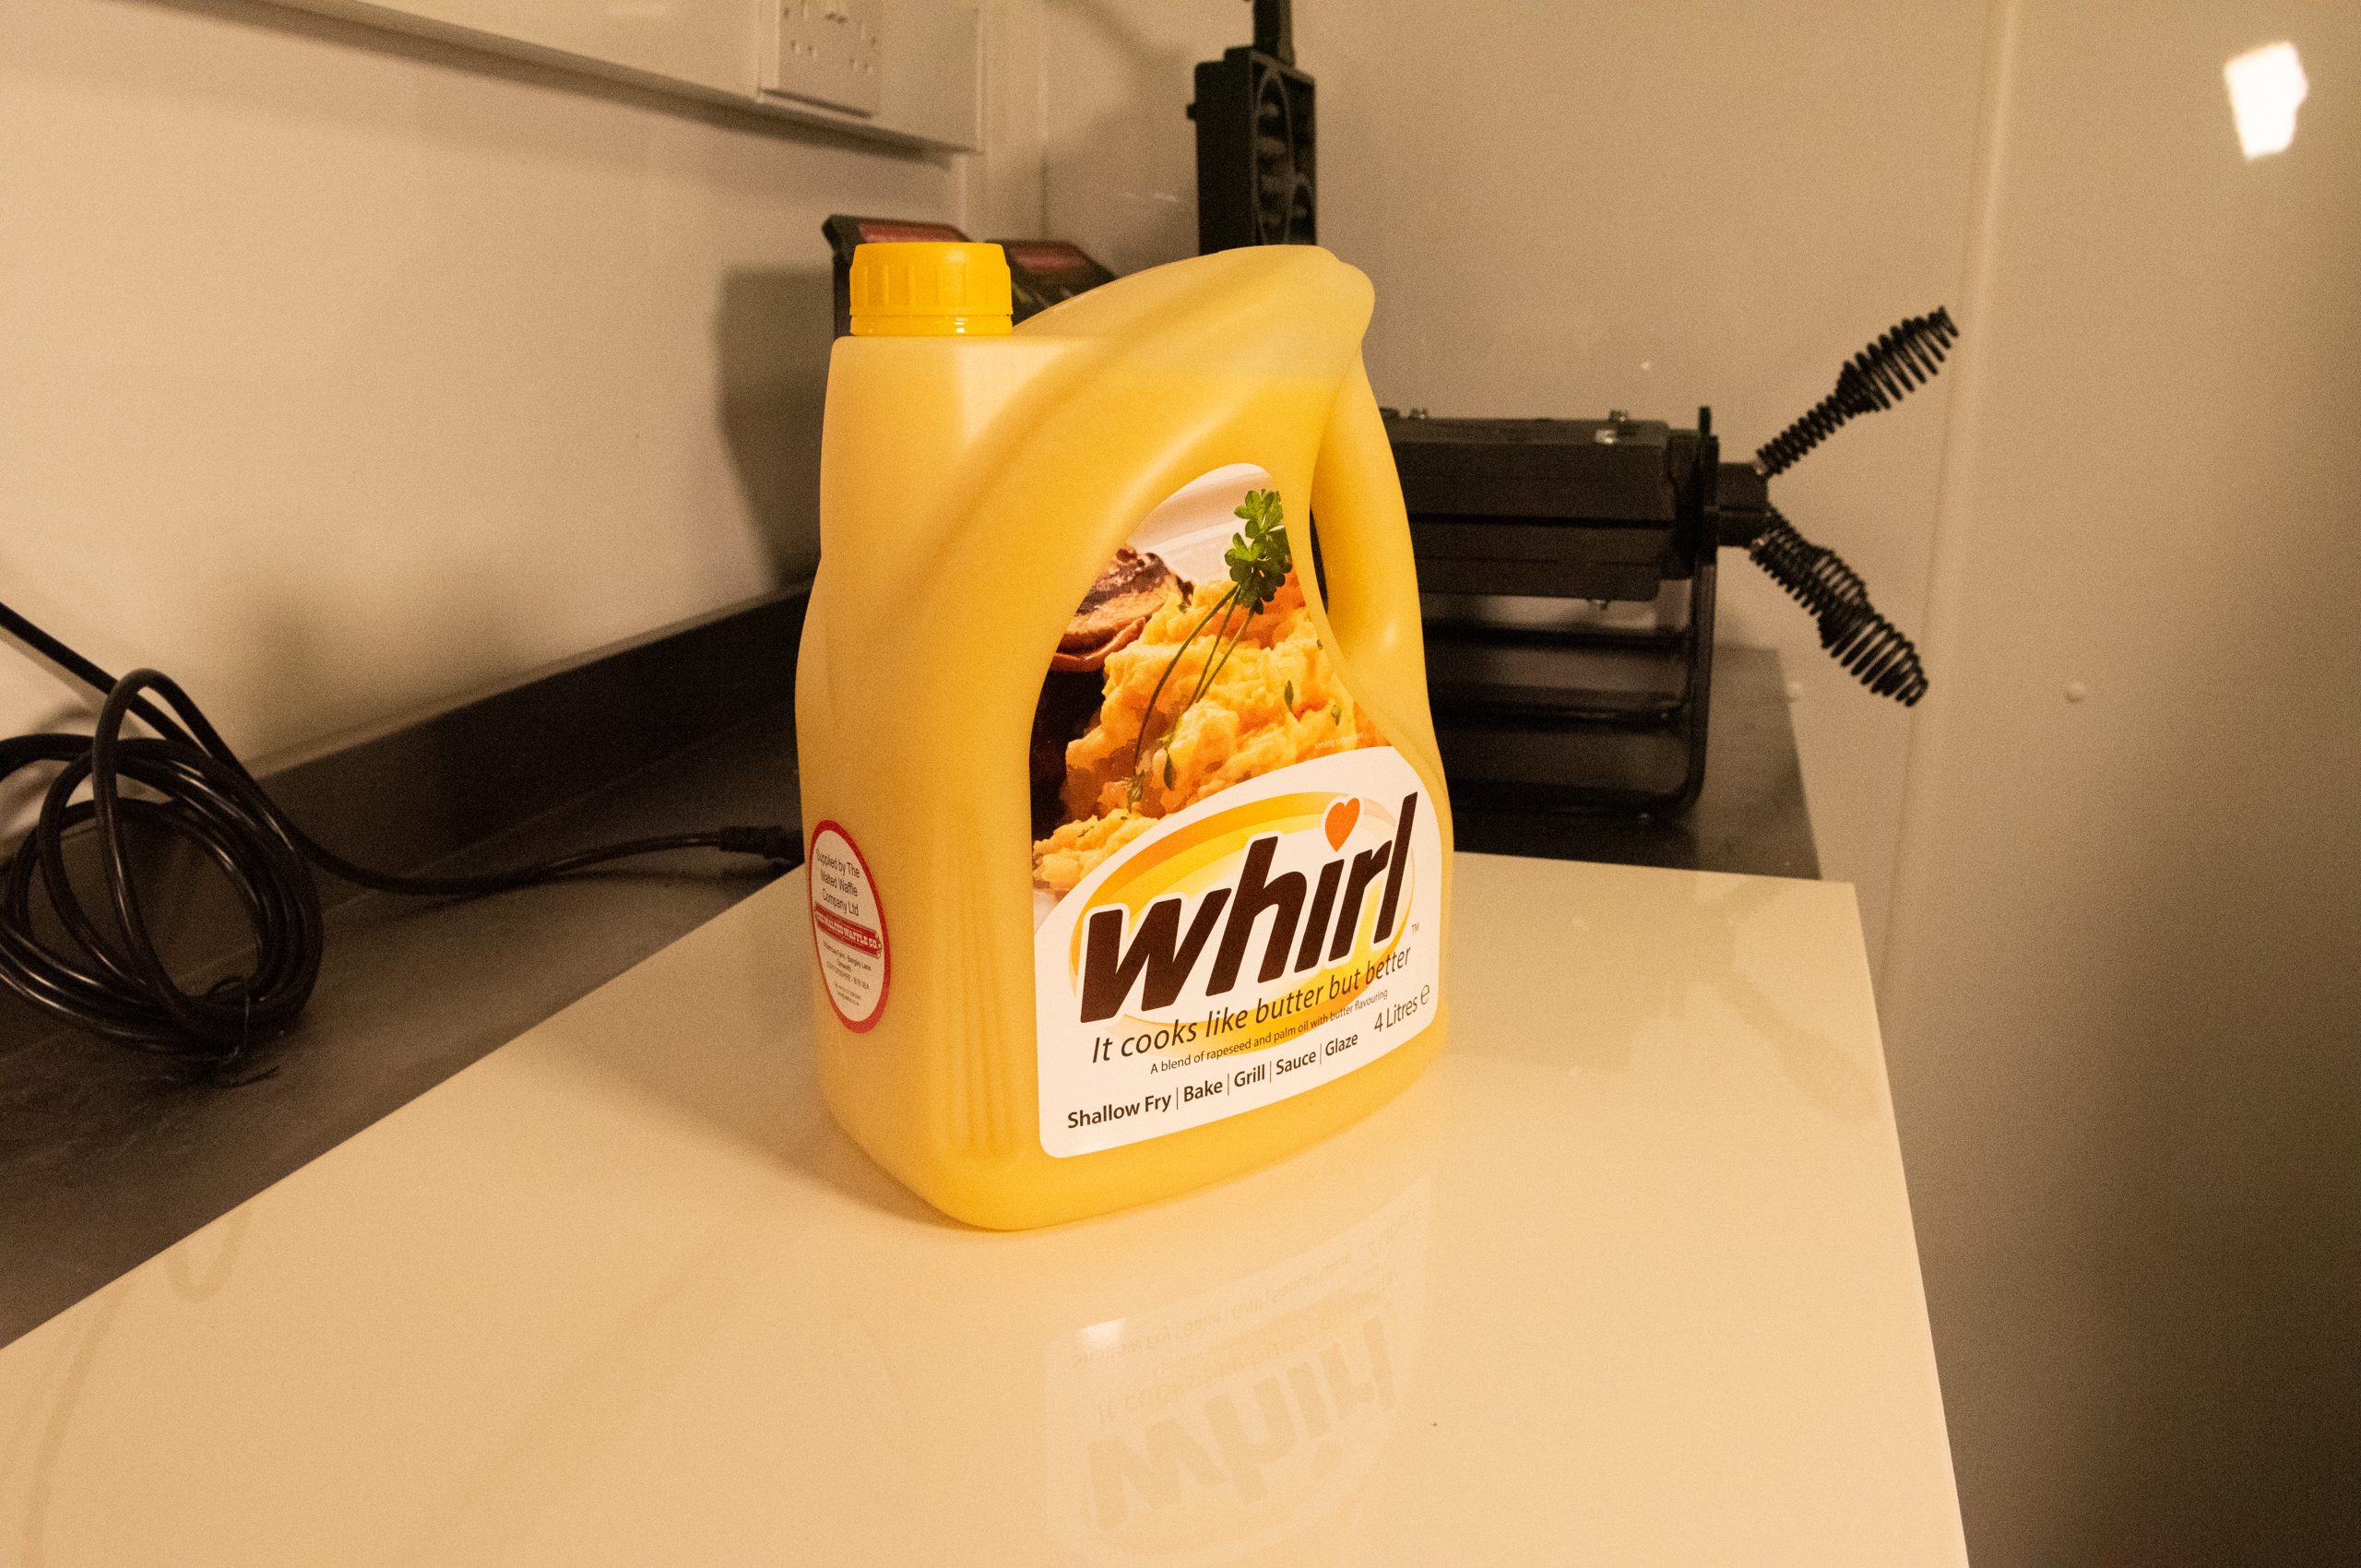 https://waffles.co.uk/wp-content/uploads/2019/01/Whirl-Butter-Substitute-4-litres-2.jpg